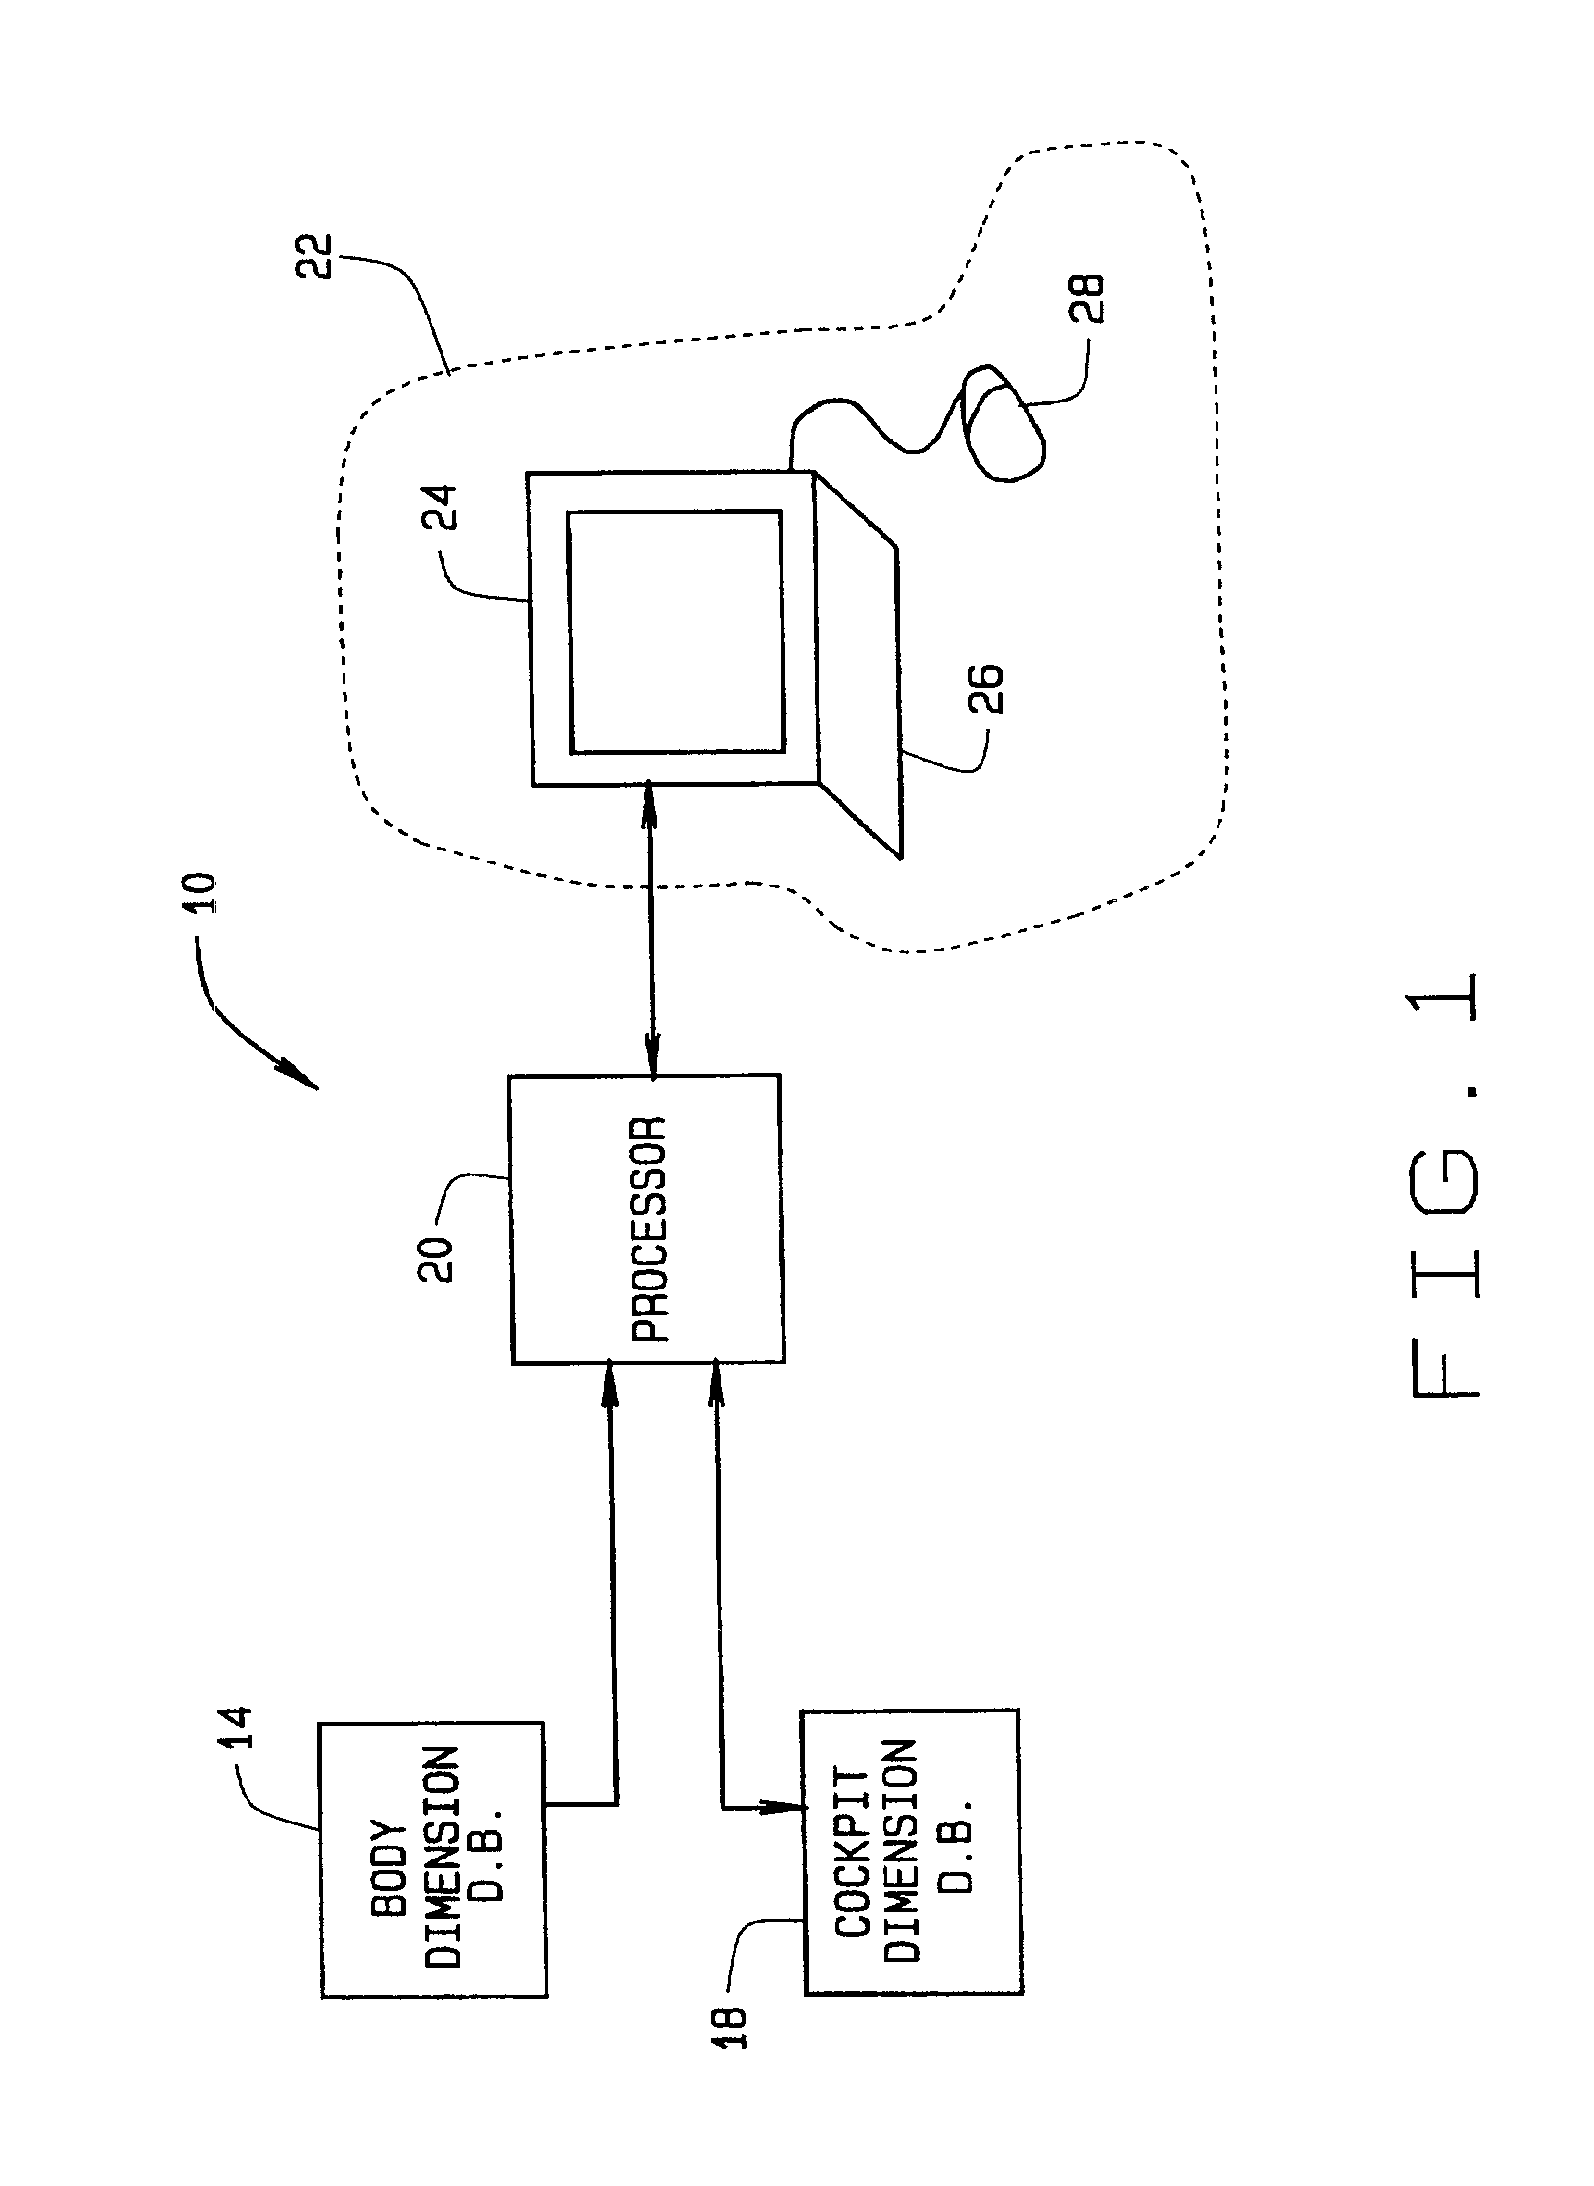 Apparatus and methods for virtual accommodation